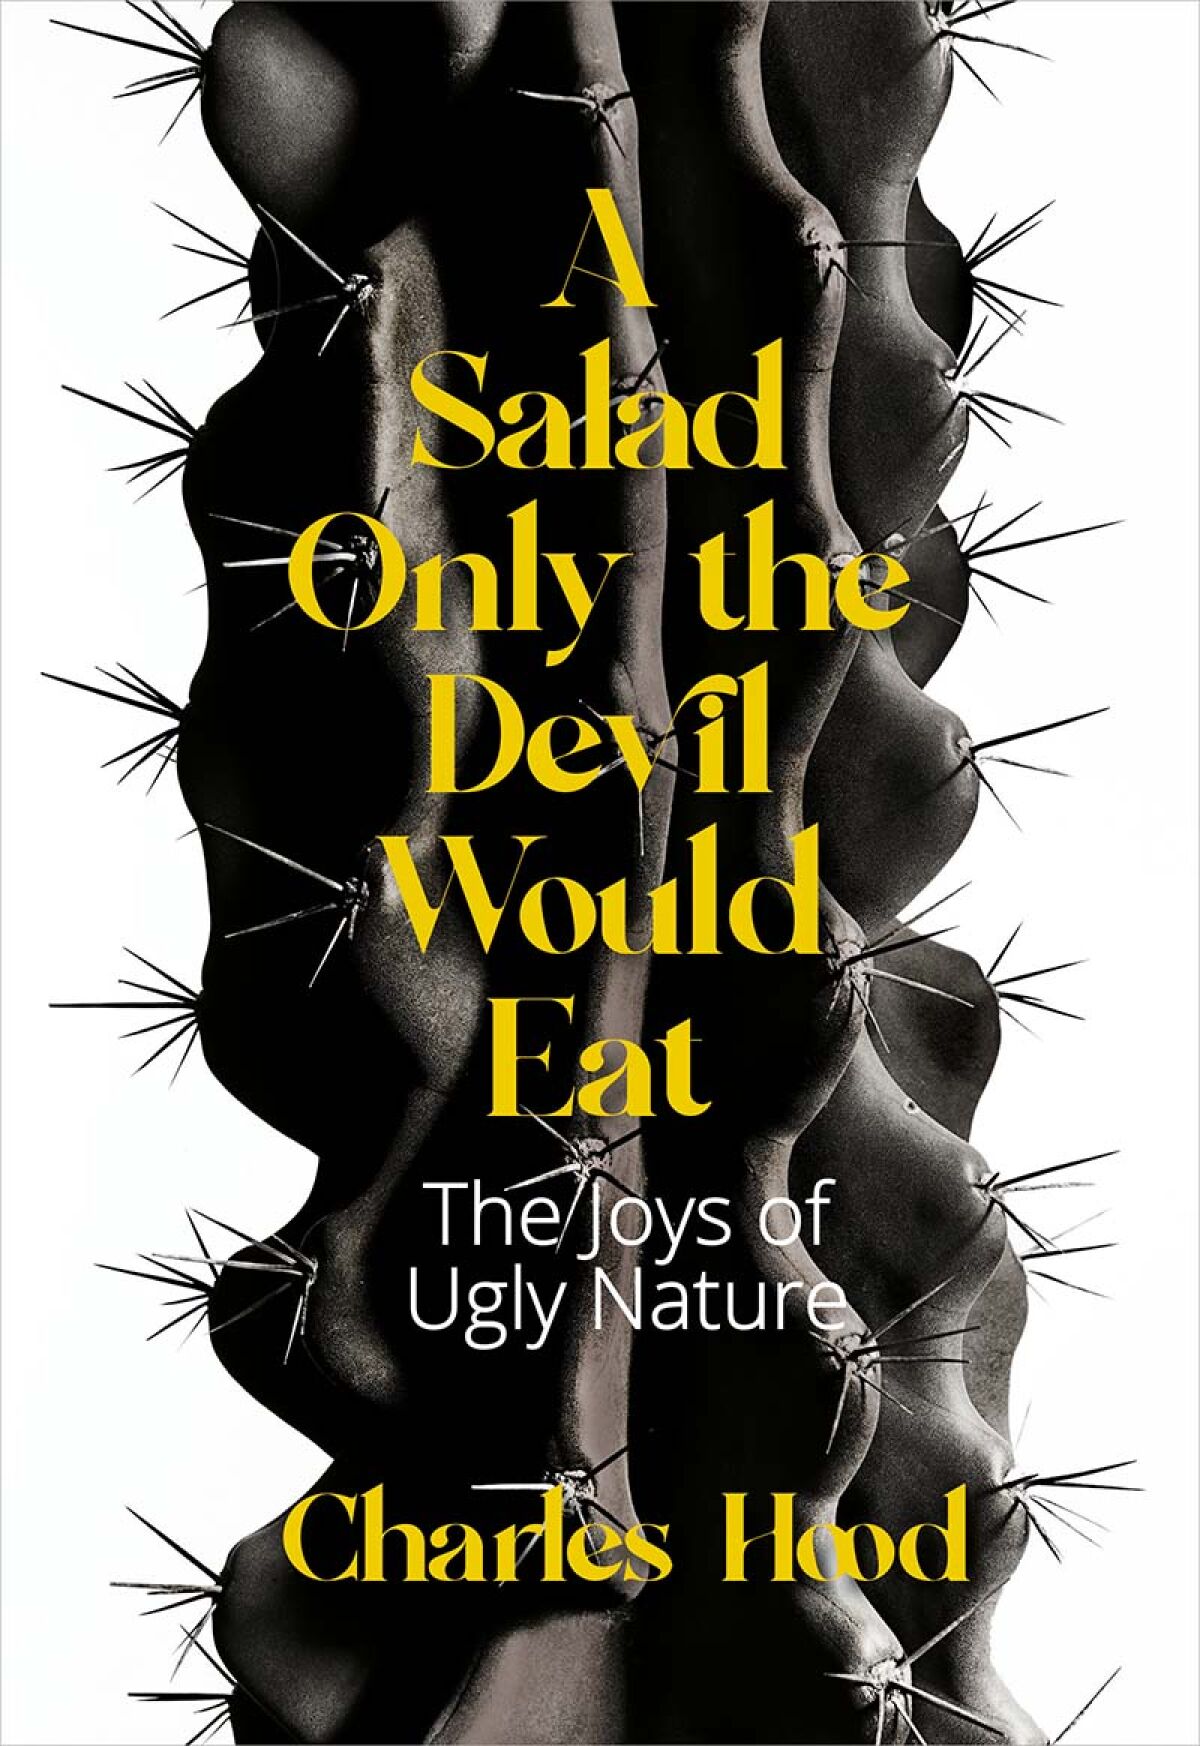 Book cover of "A Salad Only the Devil Would Eat" by Charles Hood